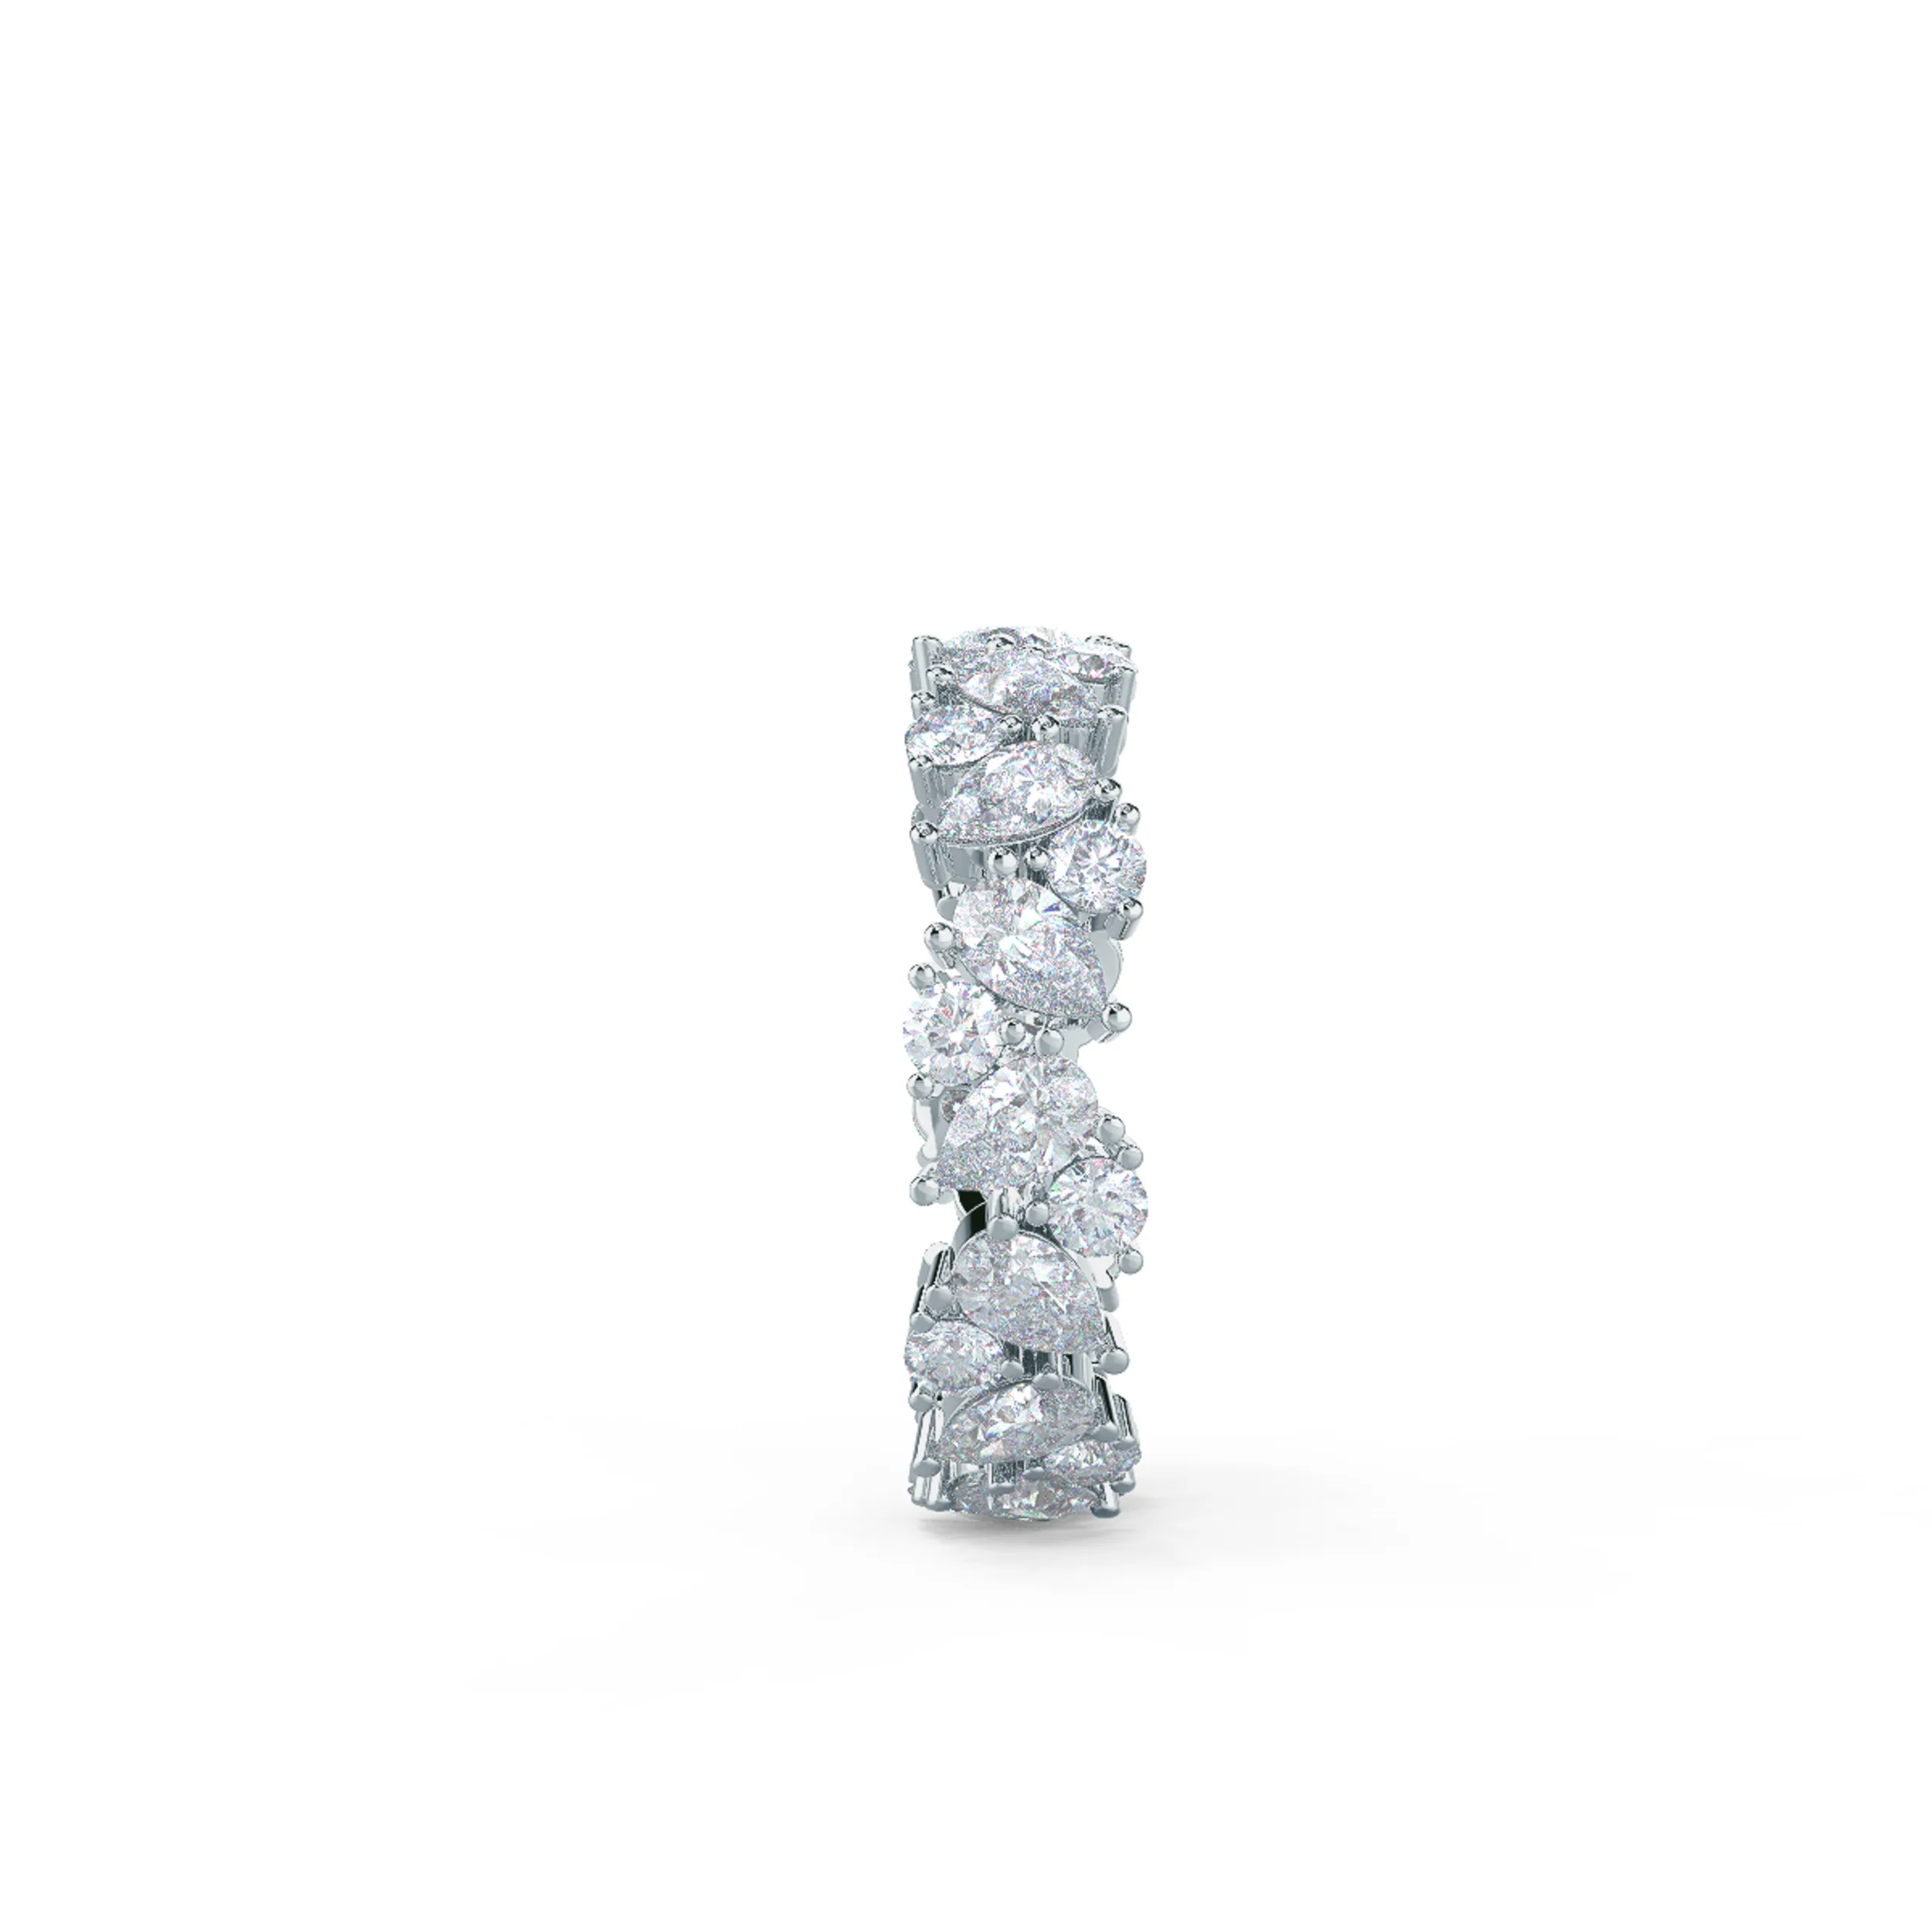 Hand Selected 2.2 ct Diamonds set in 18 Karat White Gold Theresa Eternity Band (Side View)